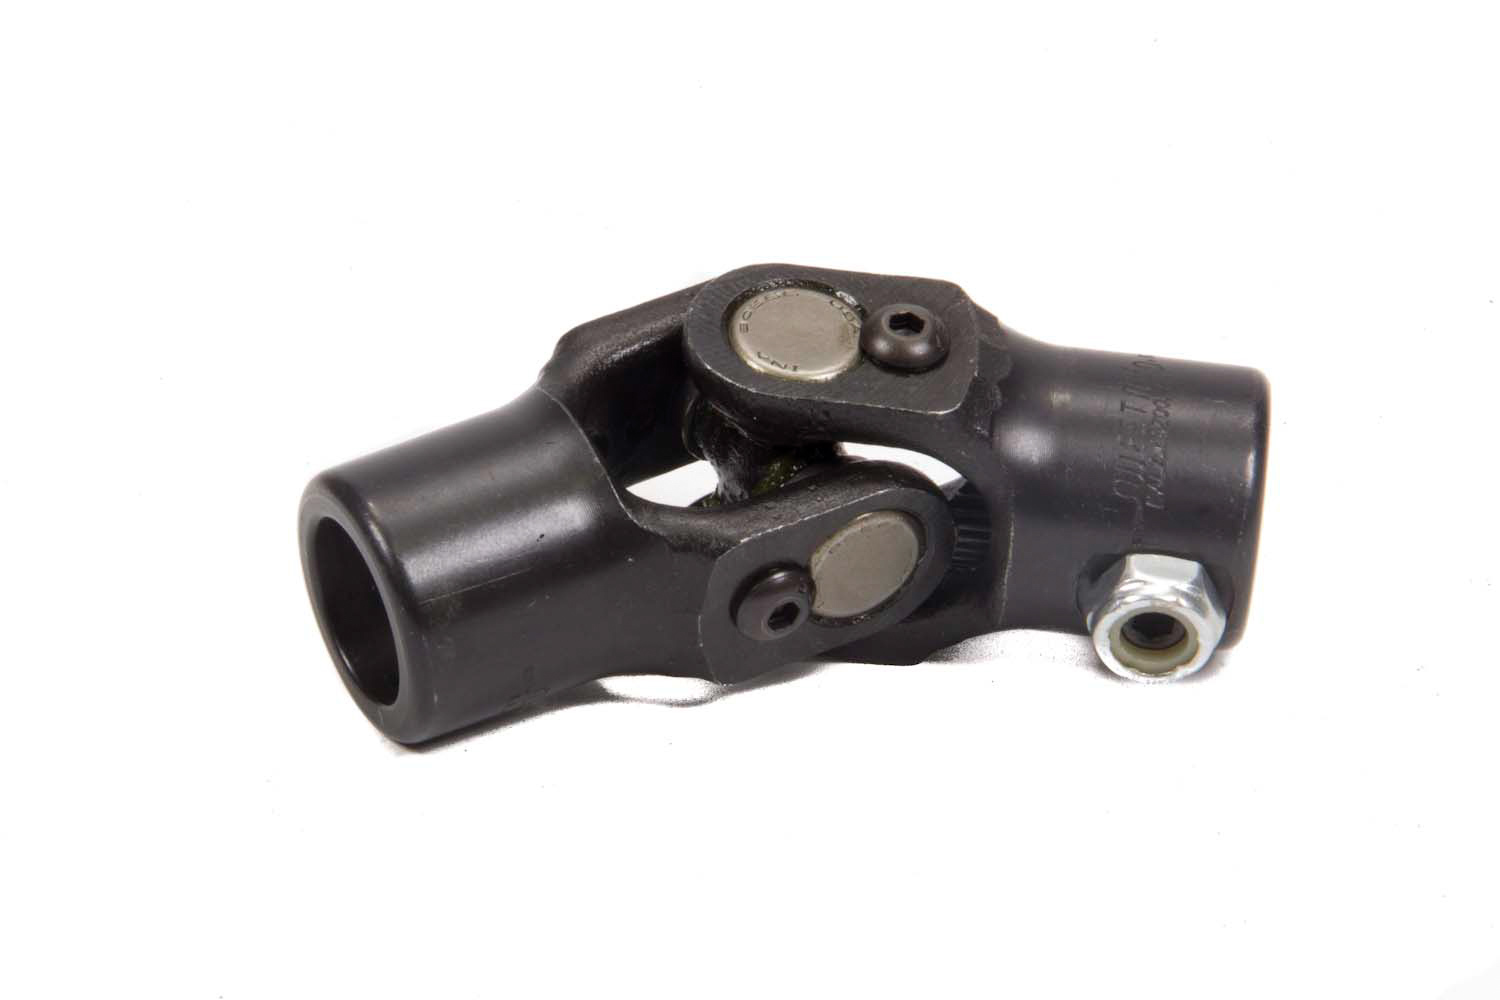 Steering Universal Joint - Single Joint - 3/4 in Smooth Bore to 3/4 in 36 Spline - Steel - Black Paint - Each